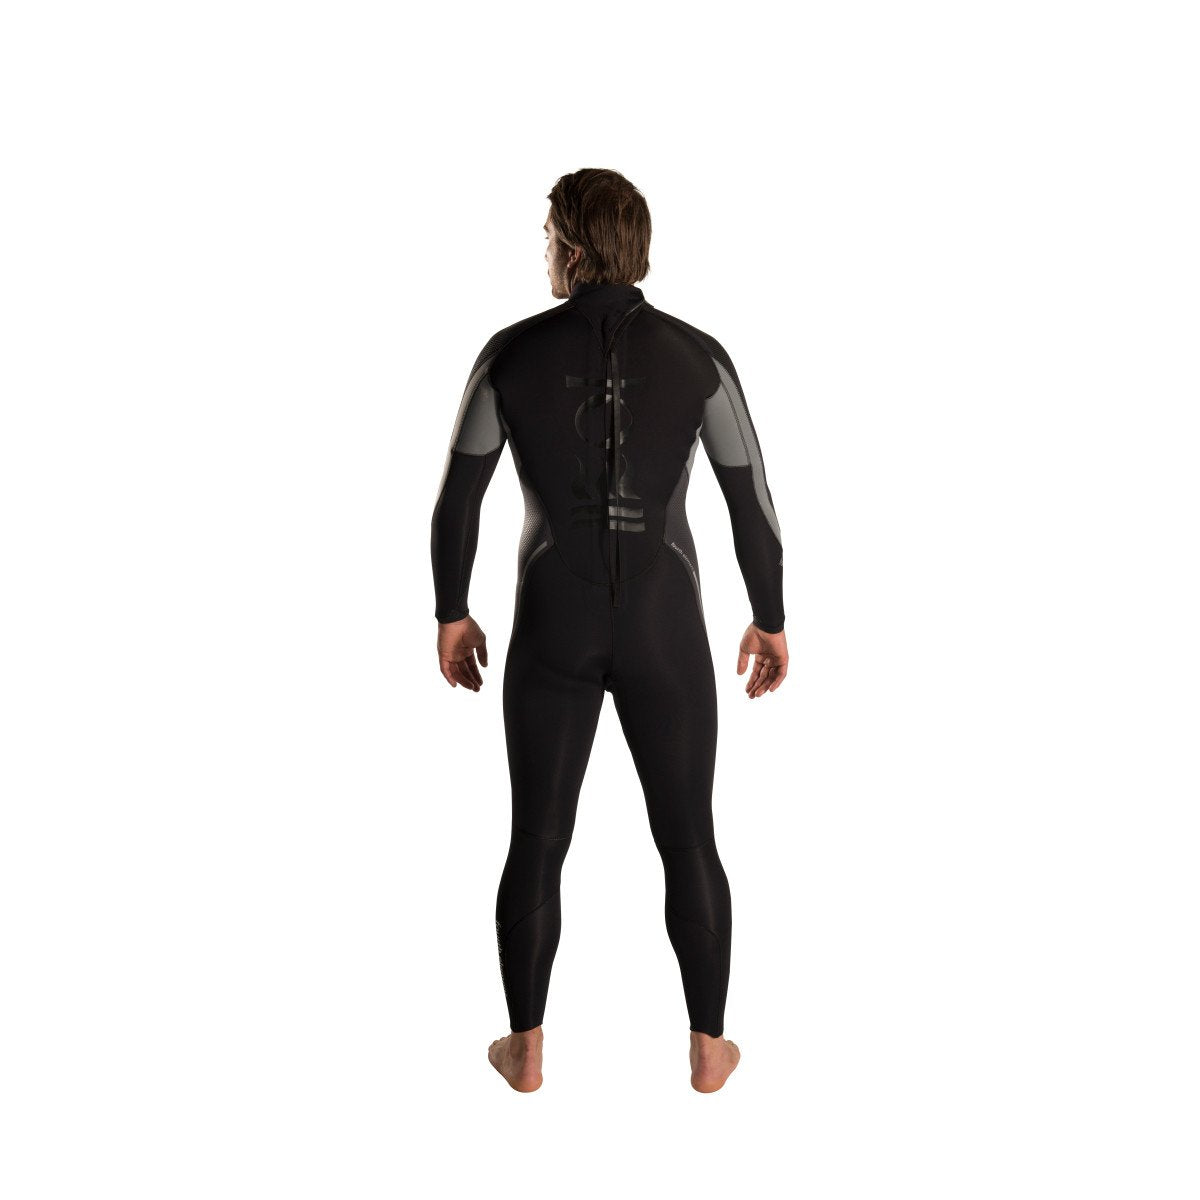 Xenos 3mm Wetsuit: Mens - Oyster Diving Equipment